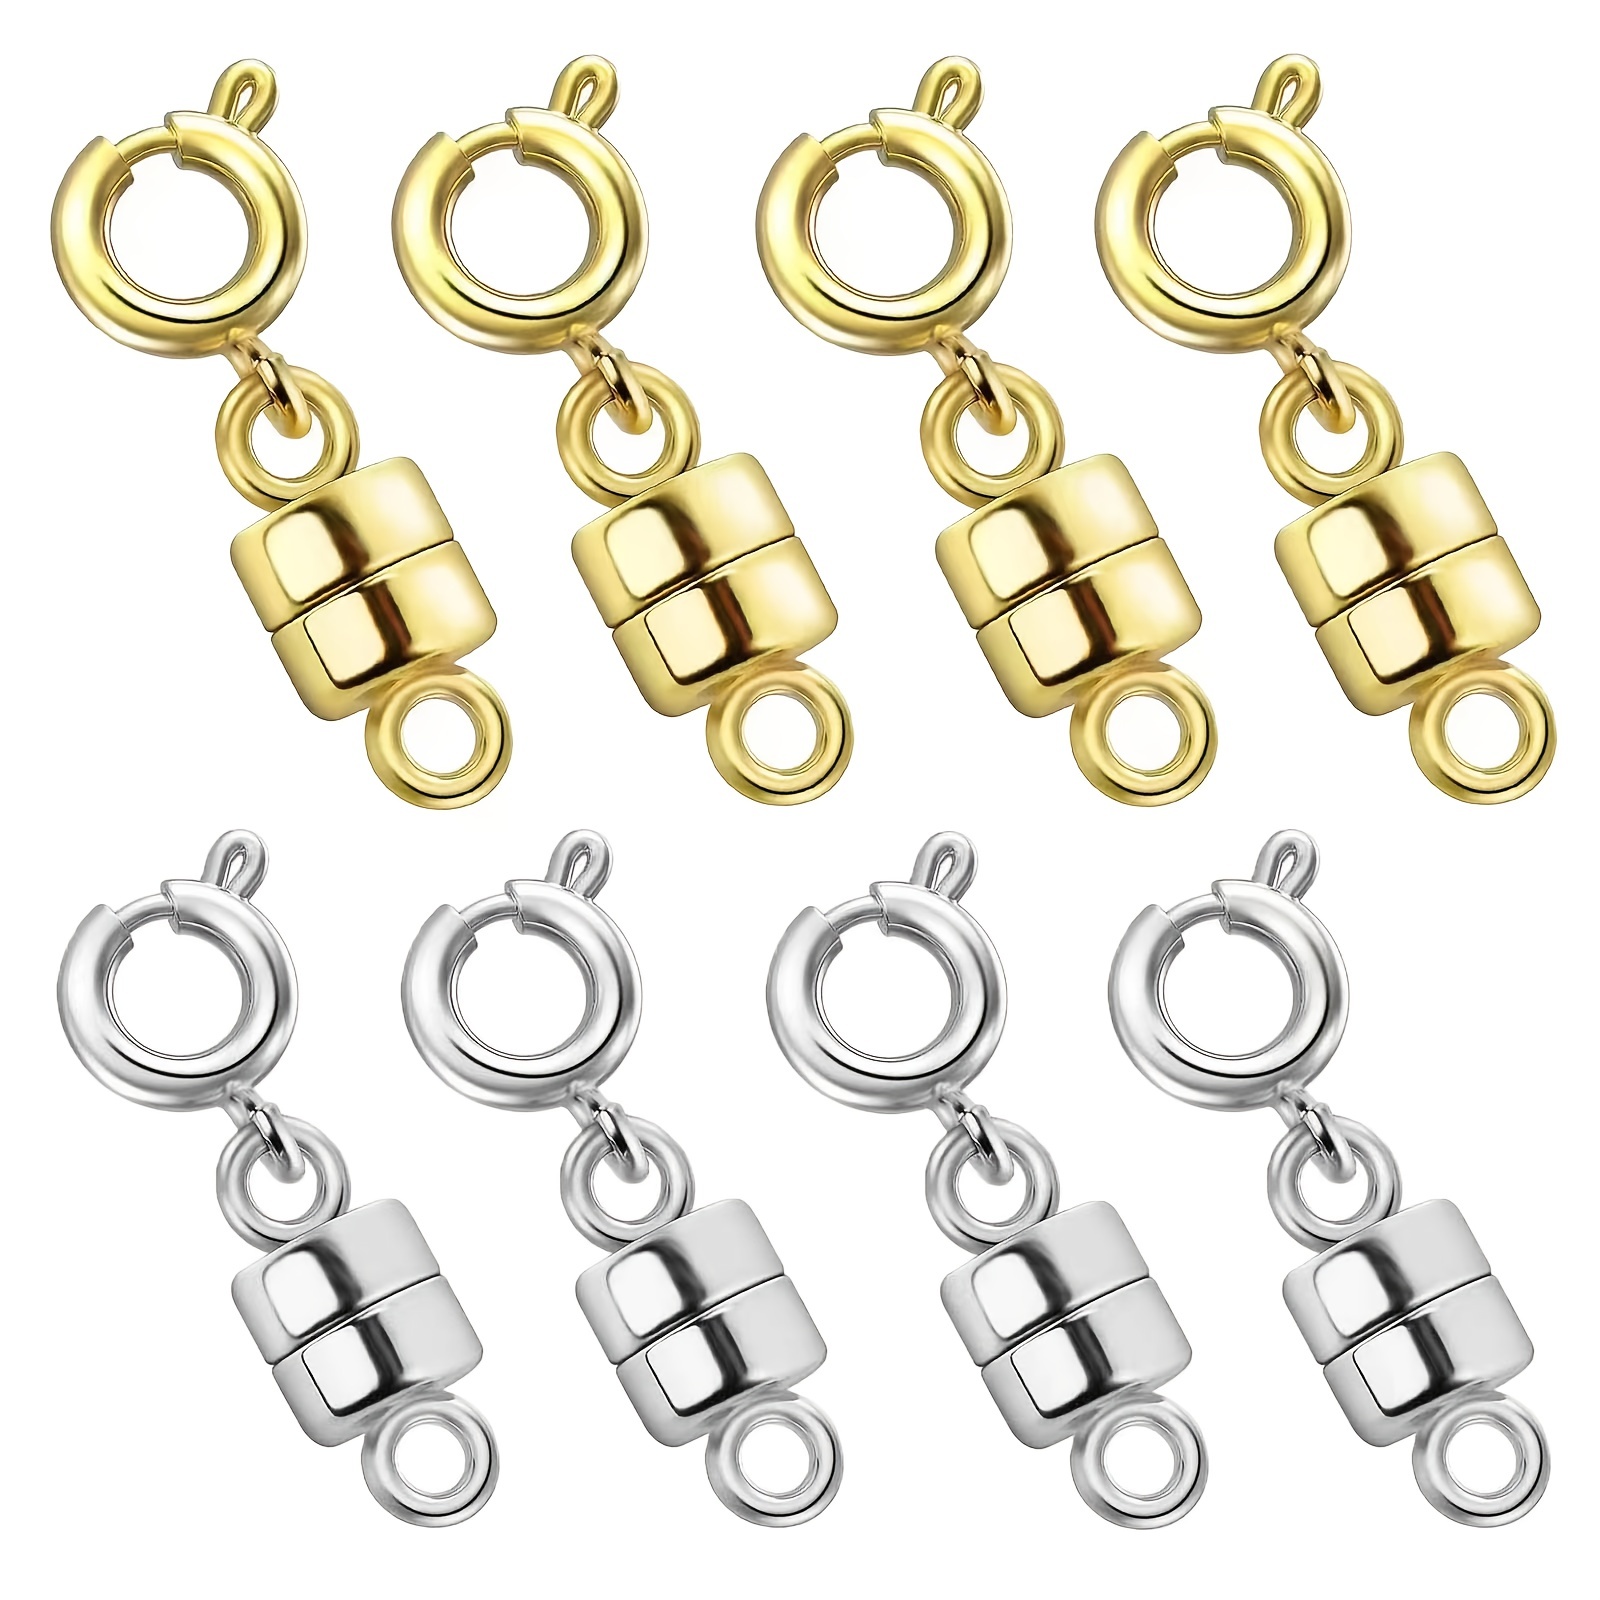  Necklace Layering Clasps Magnetic Slide Lock Clasp